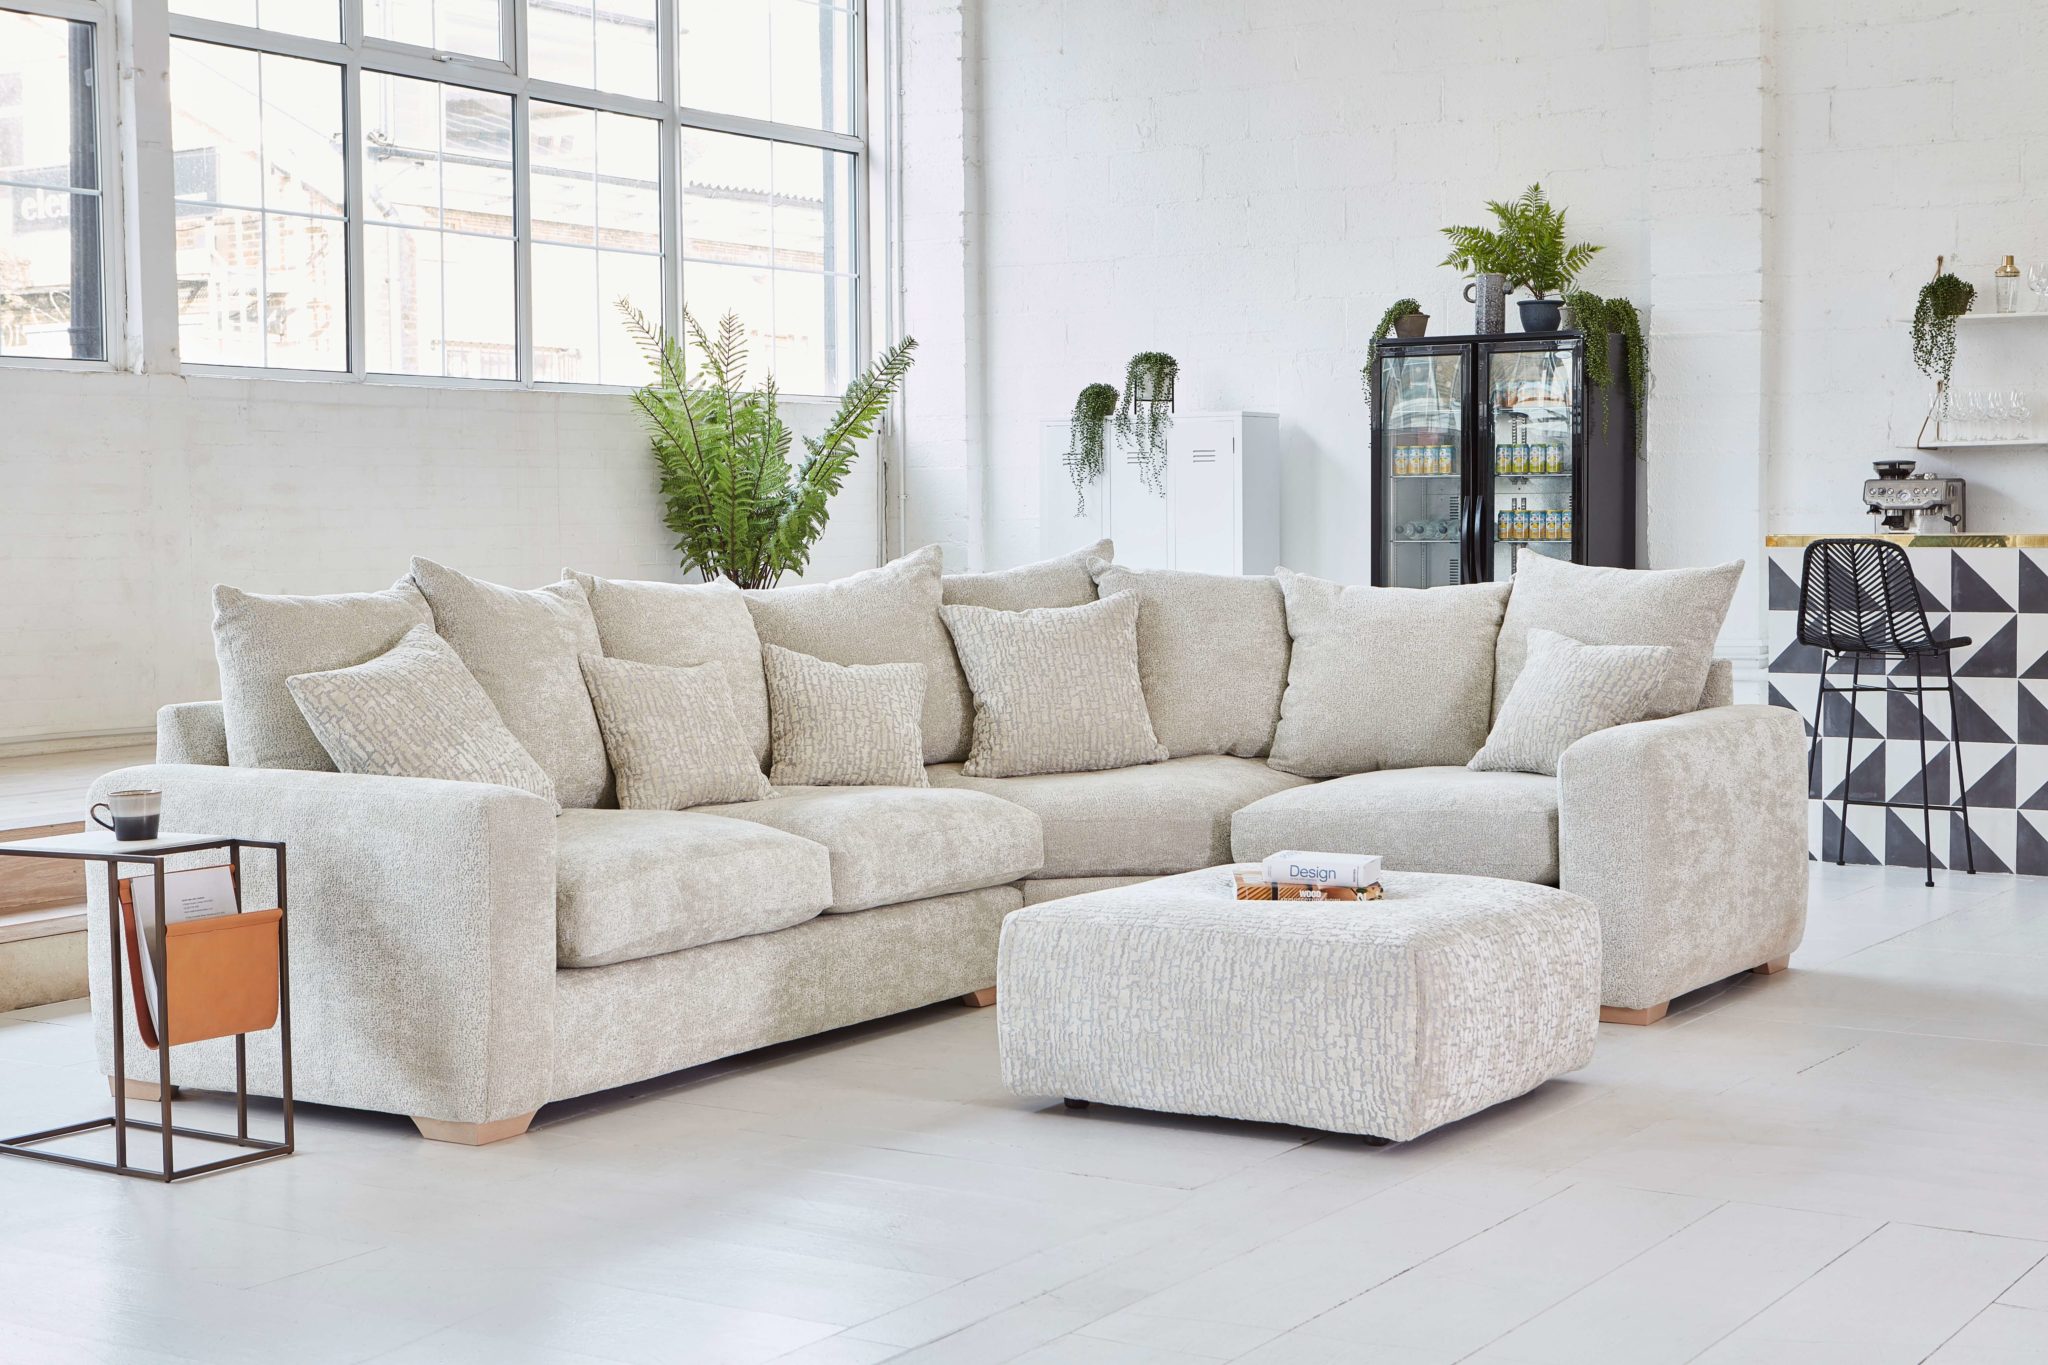 How to Shop for a corner sofa: 5 EXPERT TIPS & Tricks | by Interior ...